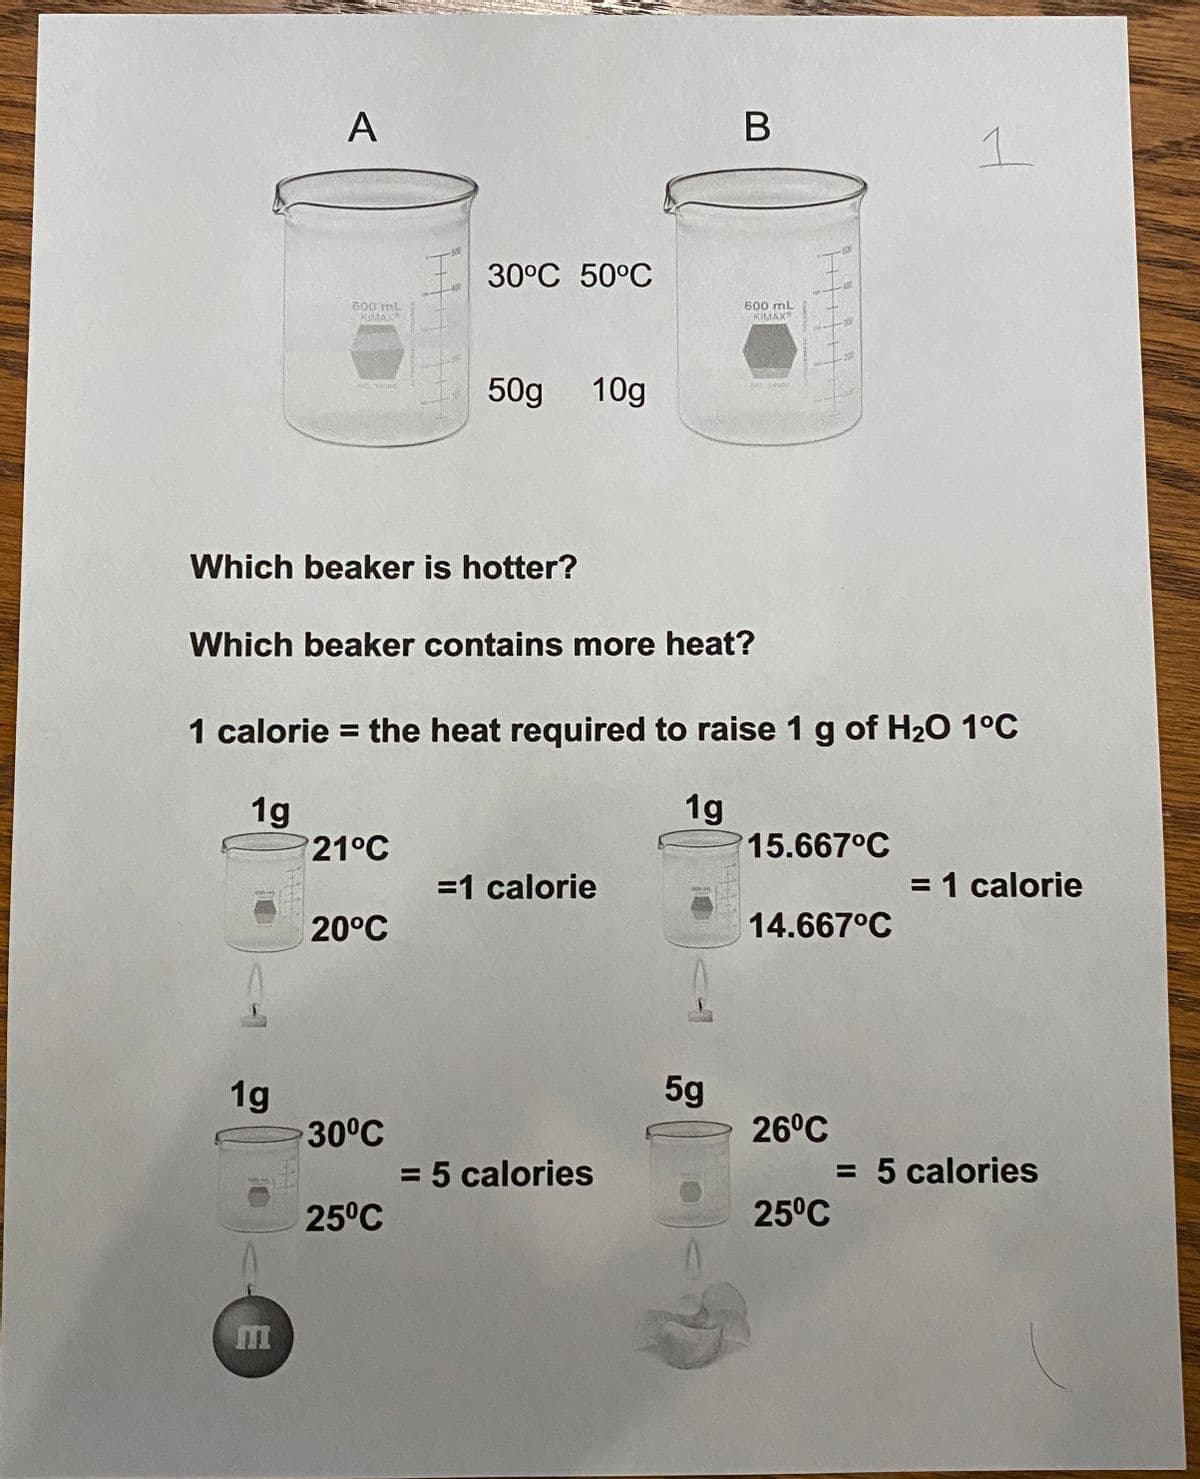 A
1.
500
500
30°C 50°C
600 mL
KIMAX
600 mL
KIMAX
50g 10g
NO SAS
Which beaker is hotter?
Which beaker contains more heat?
1 calorie = the heat required to raise 1g of H20 1°C
1g
21°C
1g
15.667°C
=1 calorie
= 1 calorie
20°C
14.667°C
1g
30°C
5g
26°C
= 5 calories
25°C
= 5 calories
25°C
